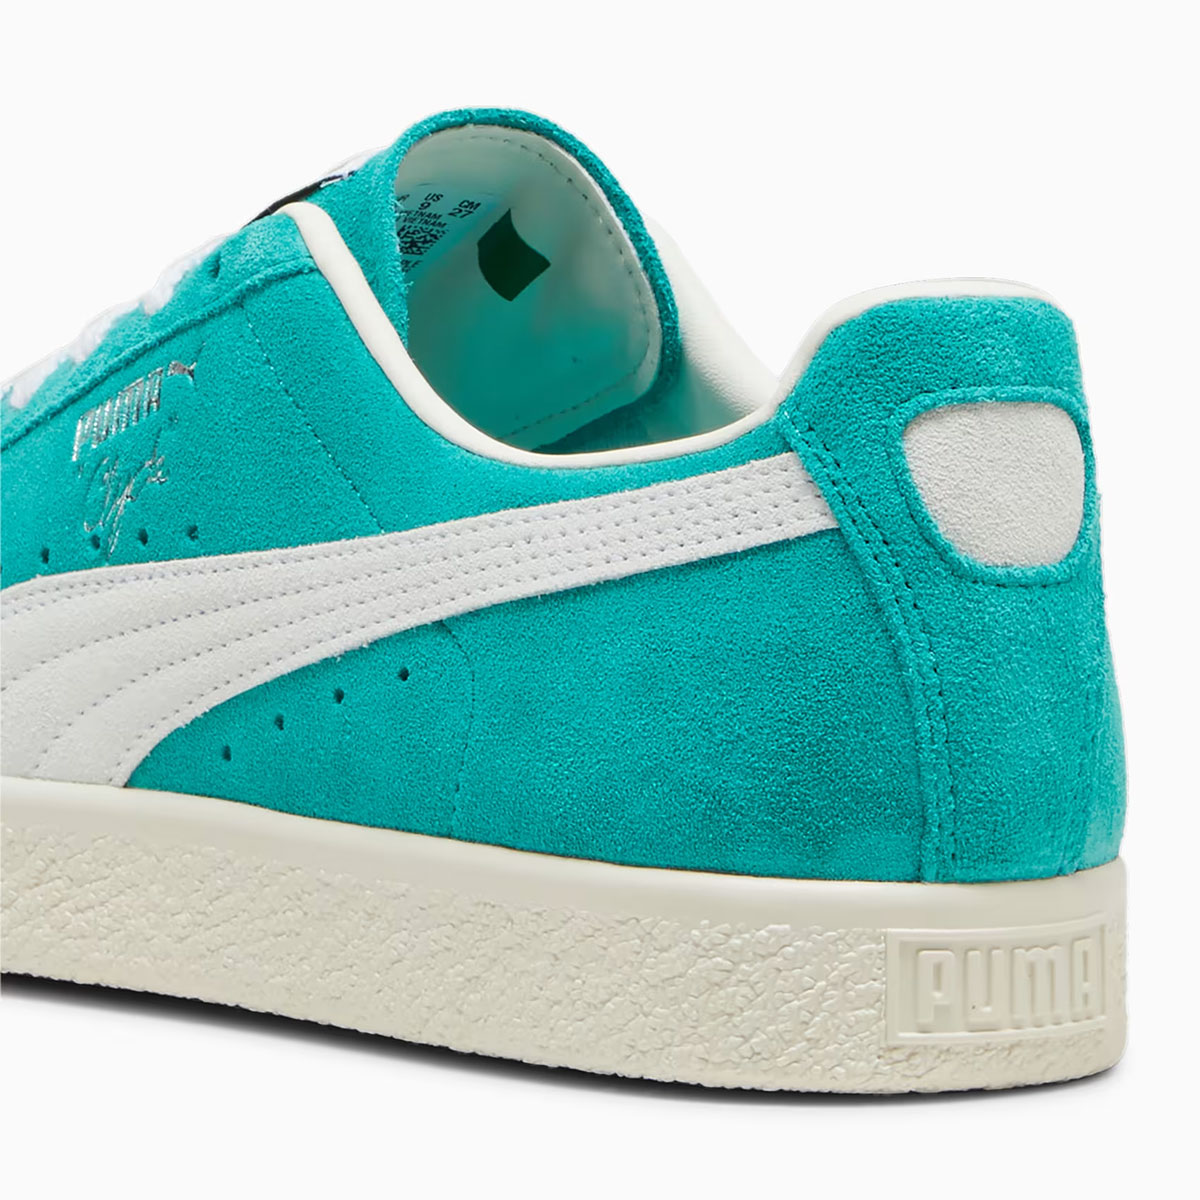 Puma Clyde Og Spectra Green Frosted Ivory 391962 13 3